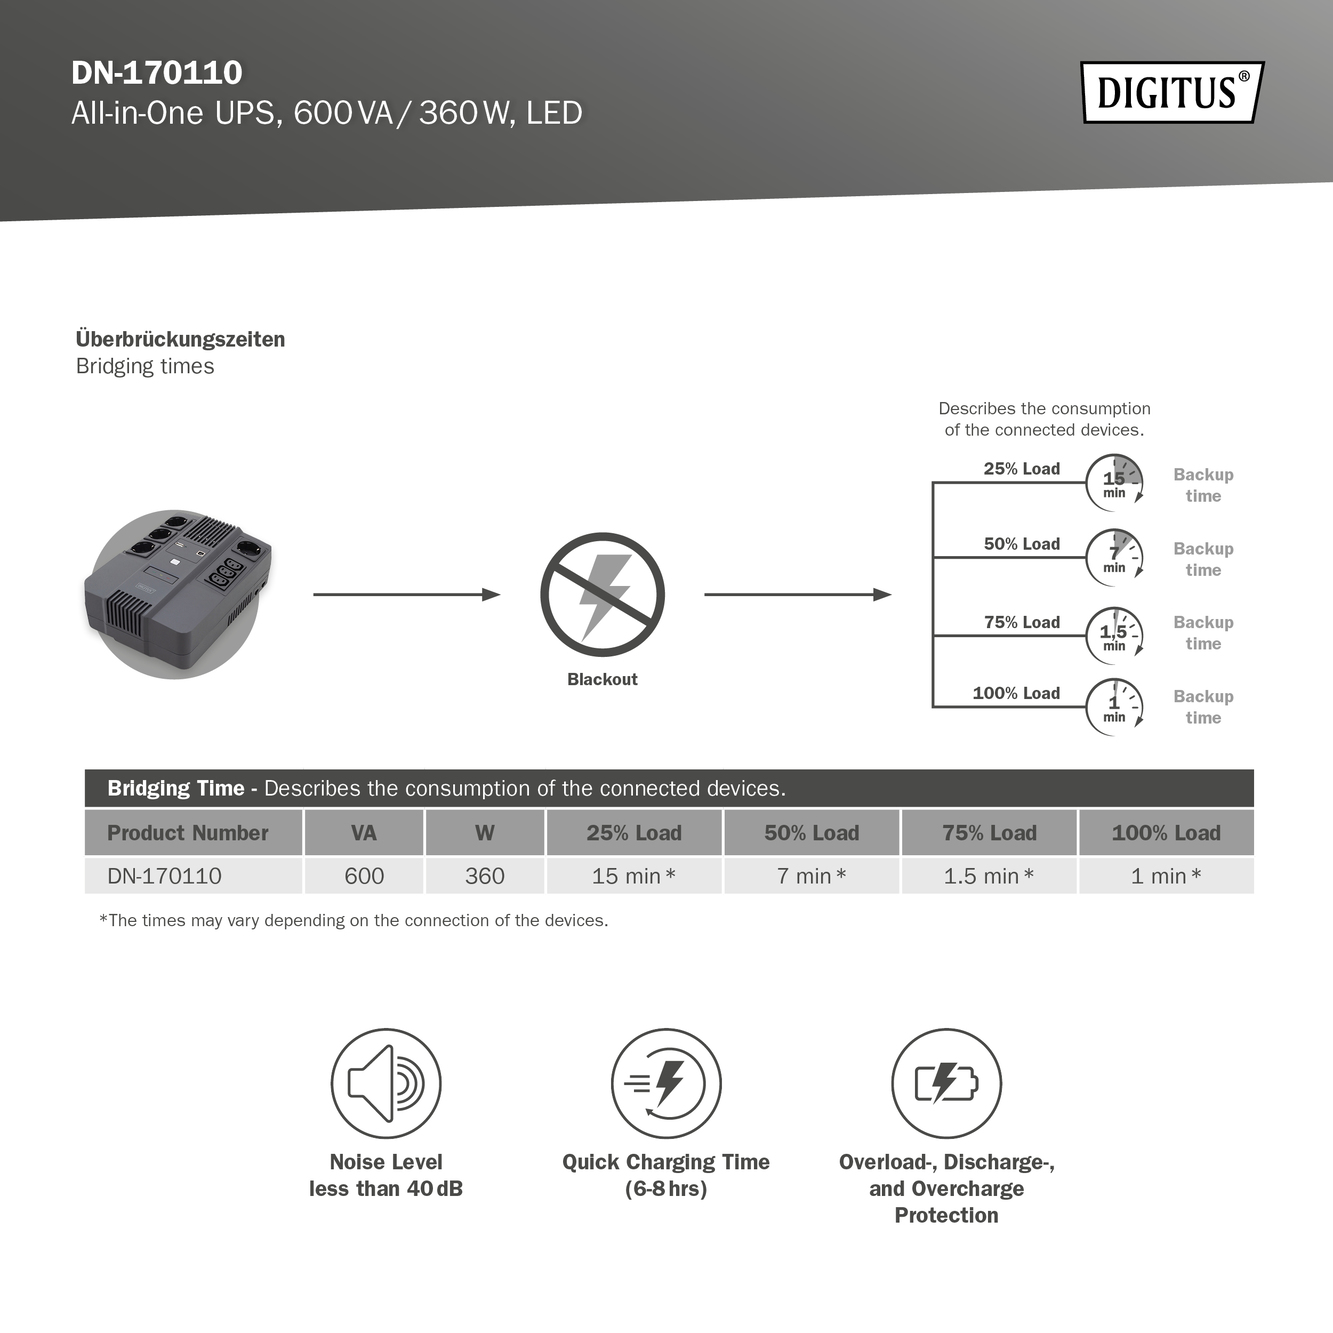  DIGITUS All-in-One UPS, 600VA/360W, LED Product number: DN-170110